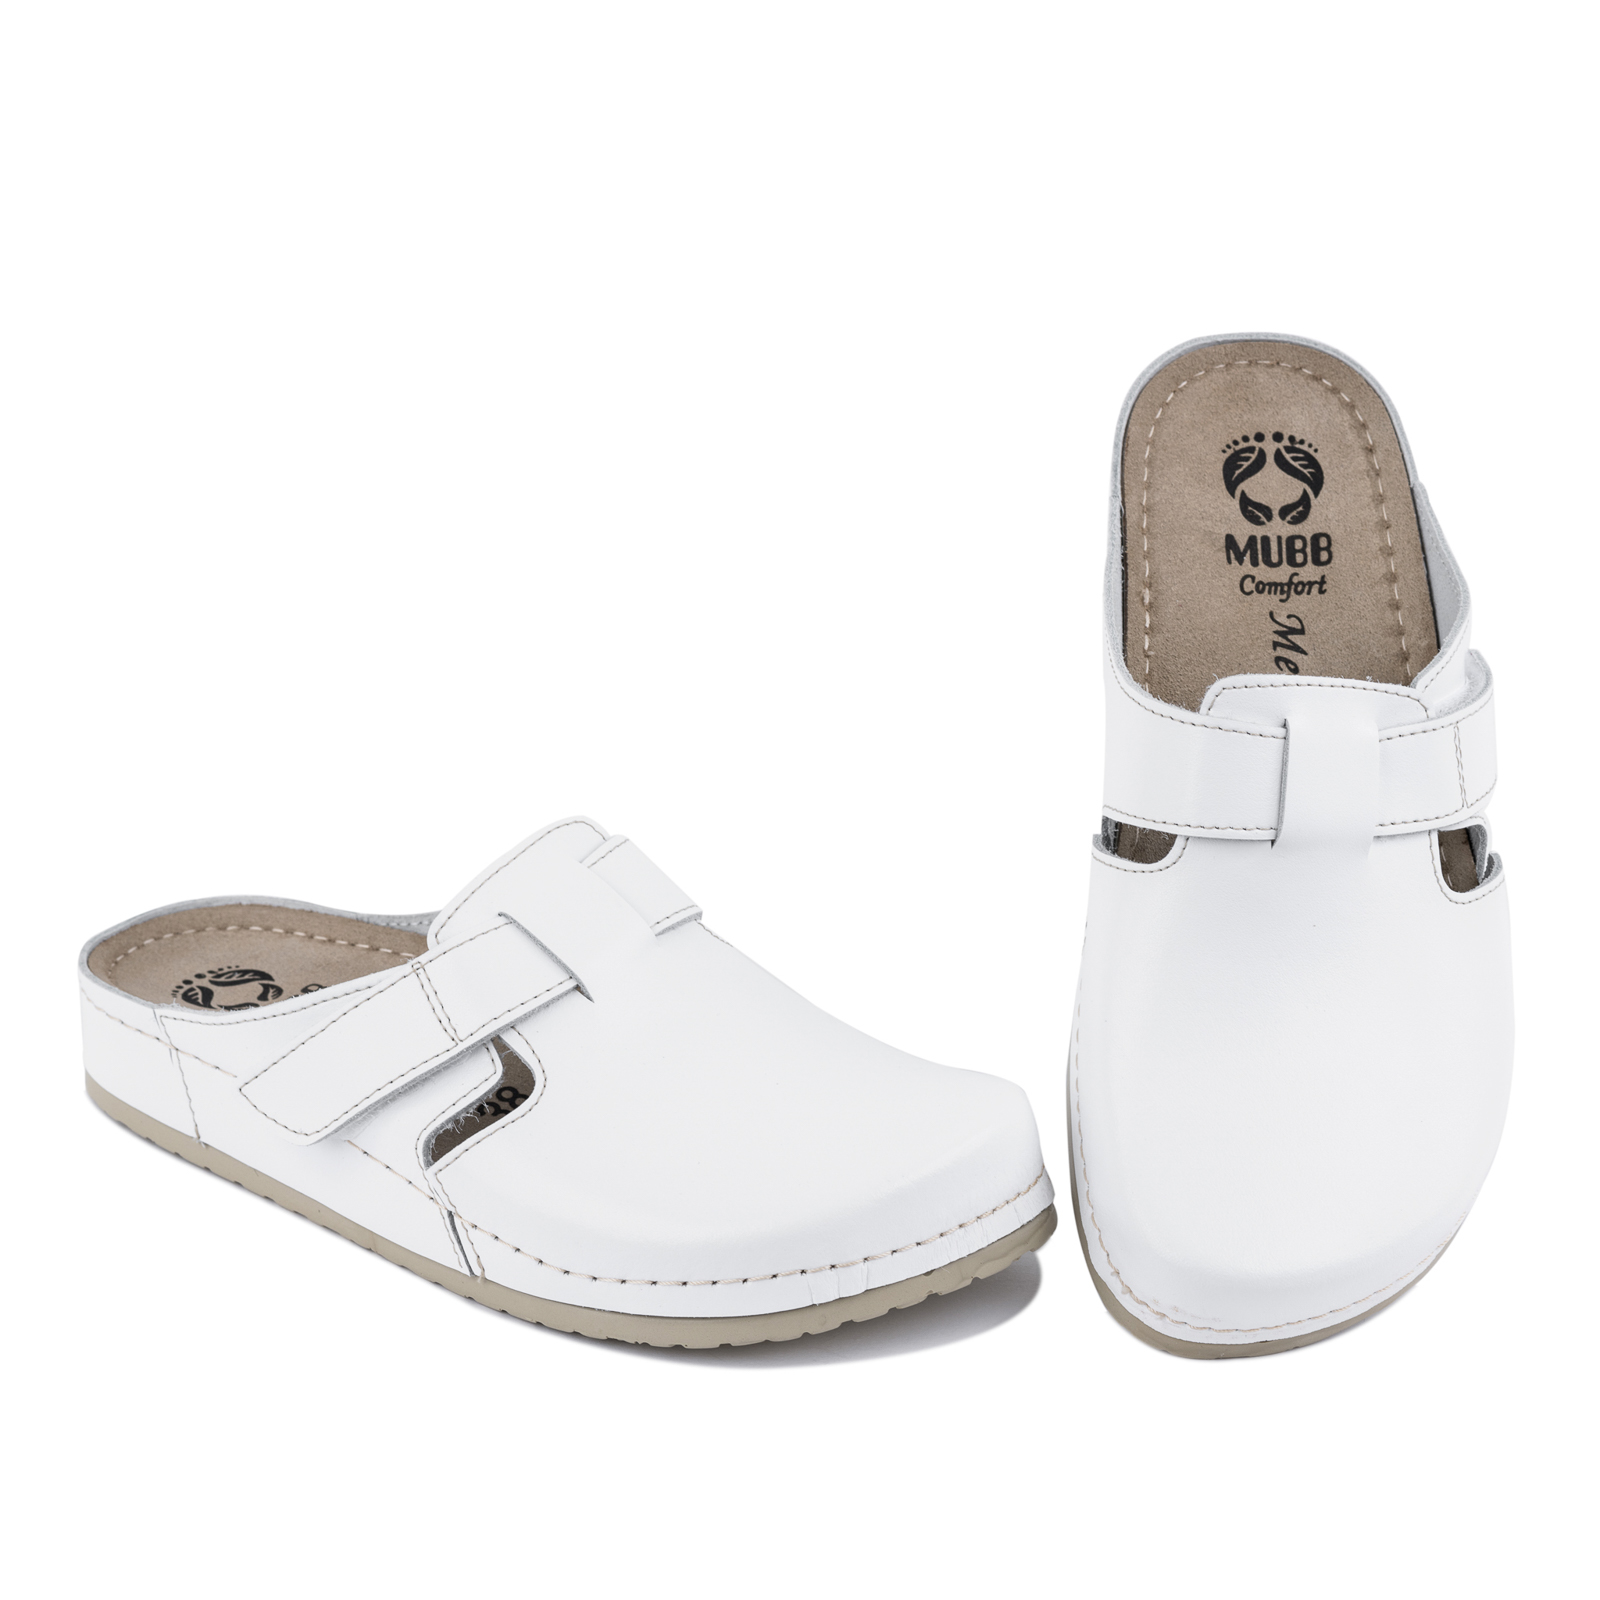 ANATOMIC LEATHER  CLOGS WITH VELCRO BAND - WHITE